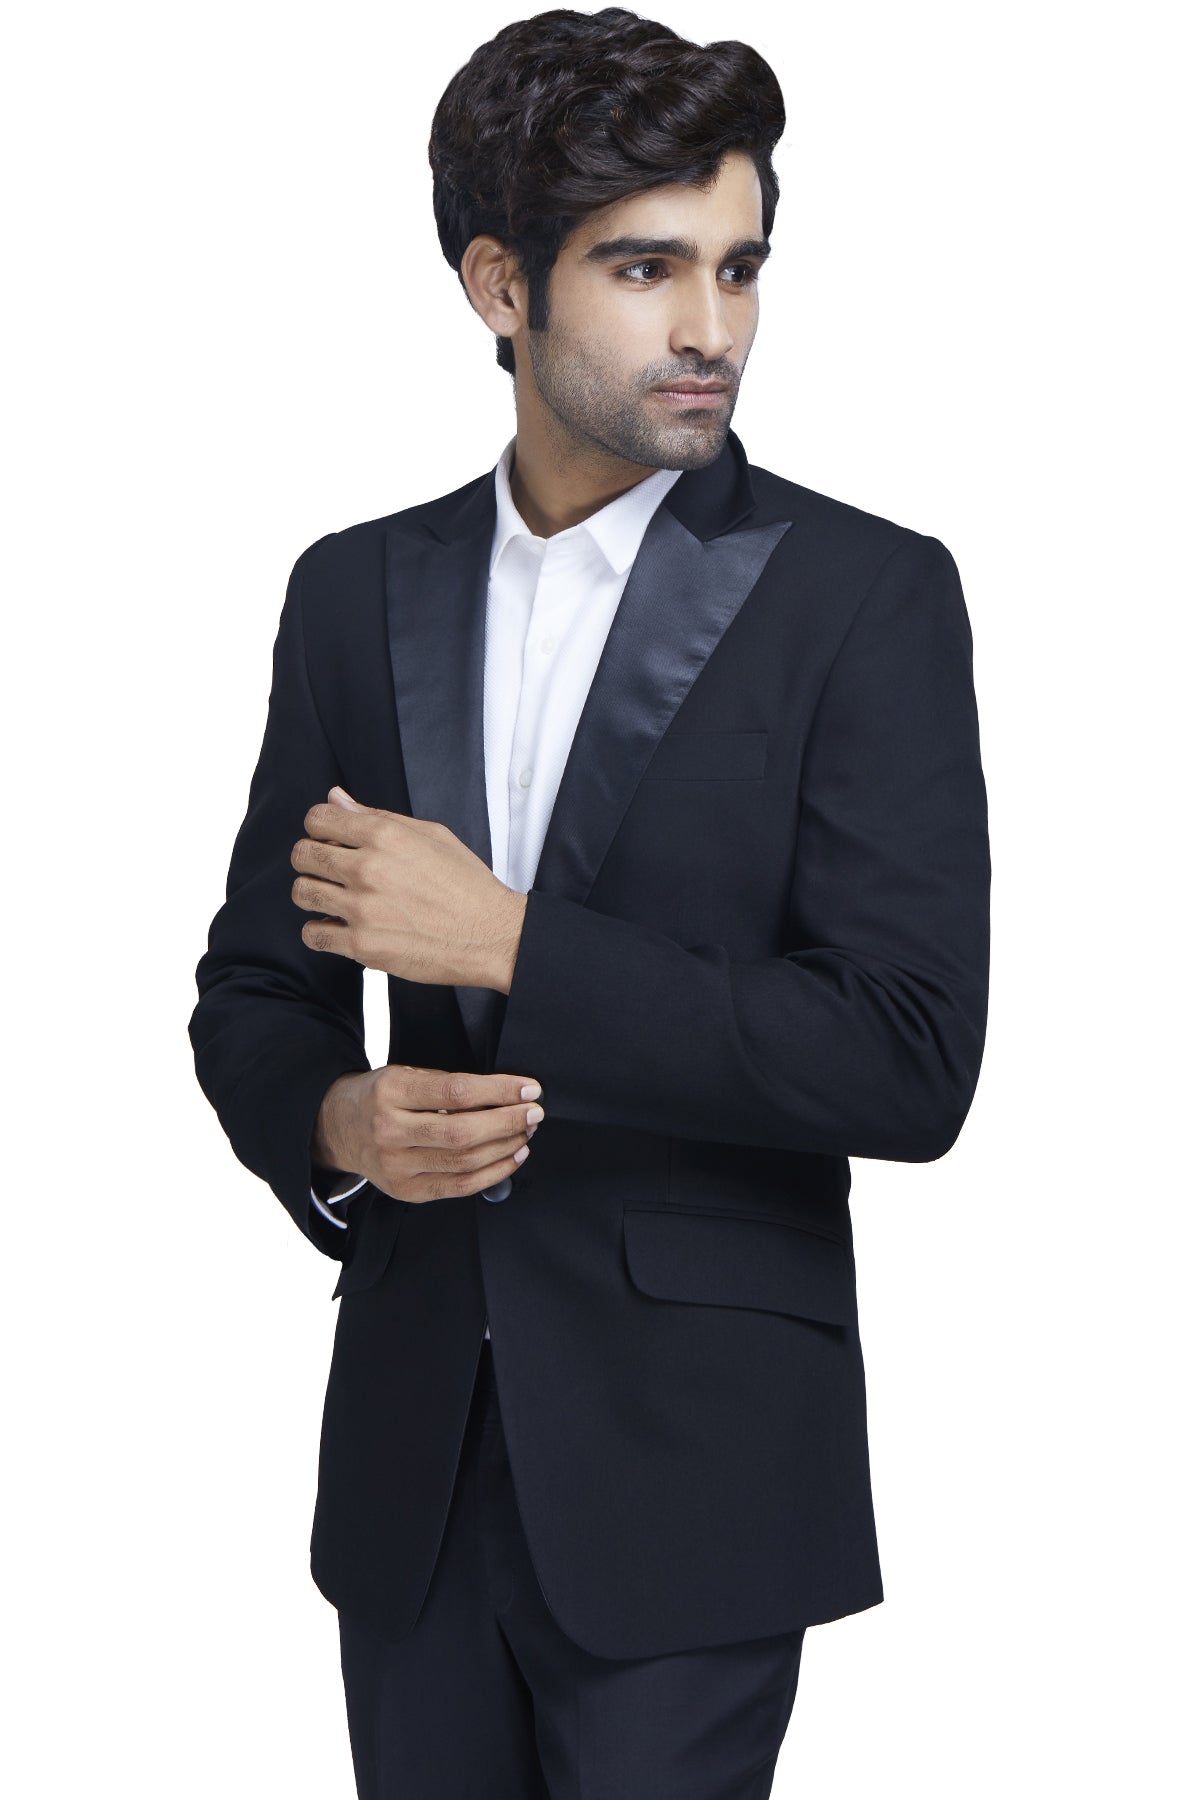 Suave as ever at the collar and smooth all across - this classic black dinner jacket has you covered for any special occasion in all it's dapper glory. 